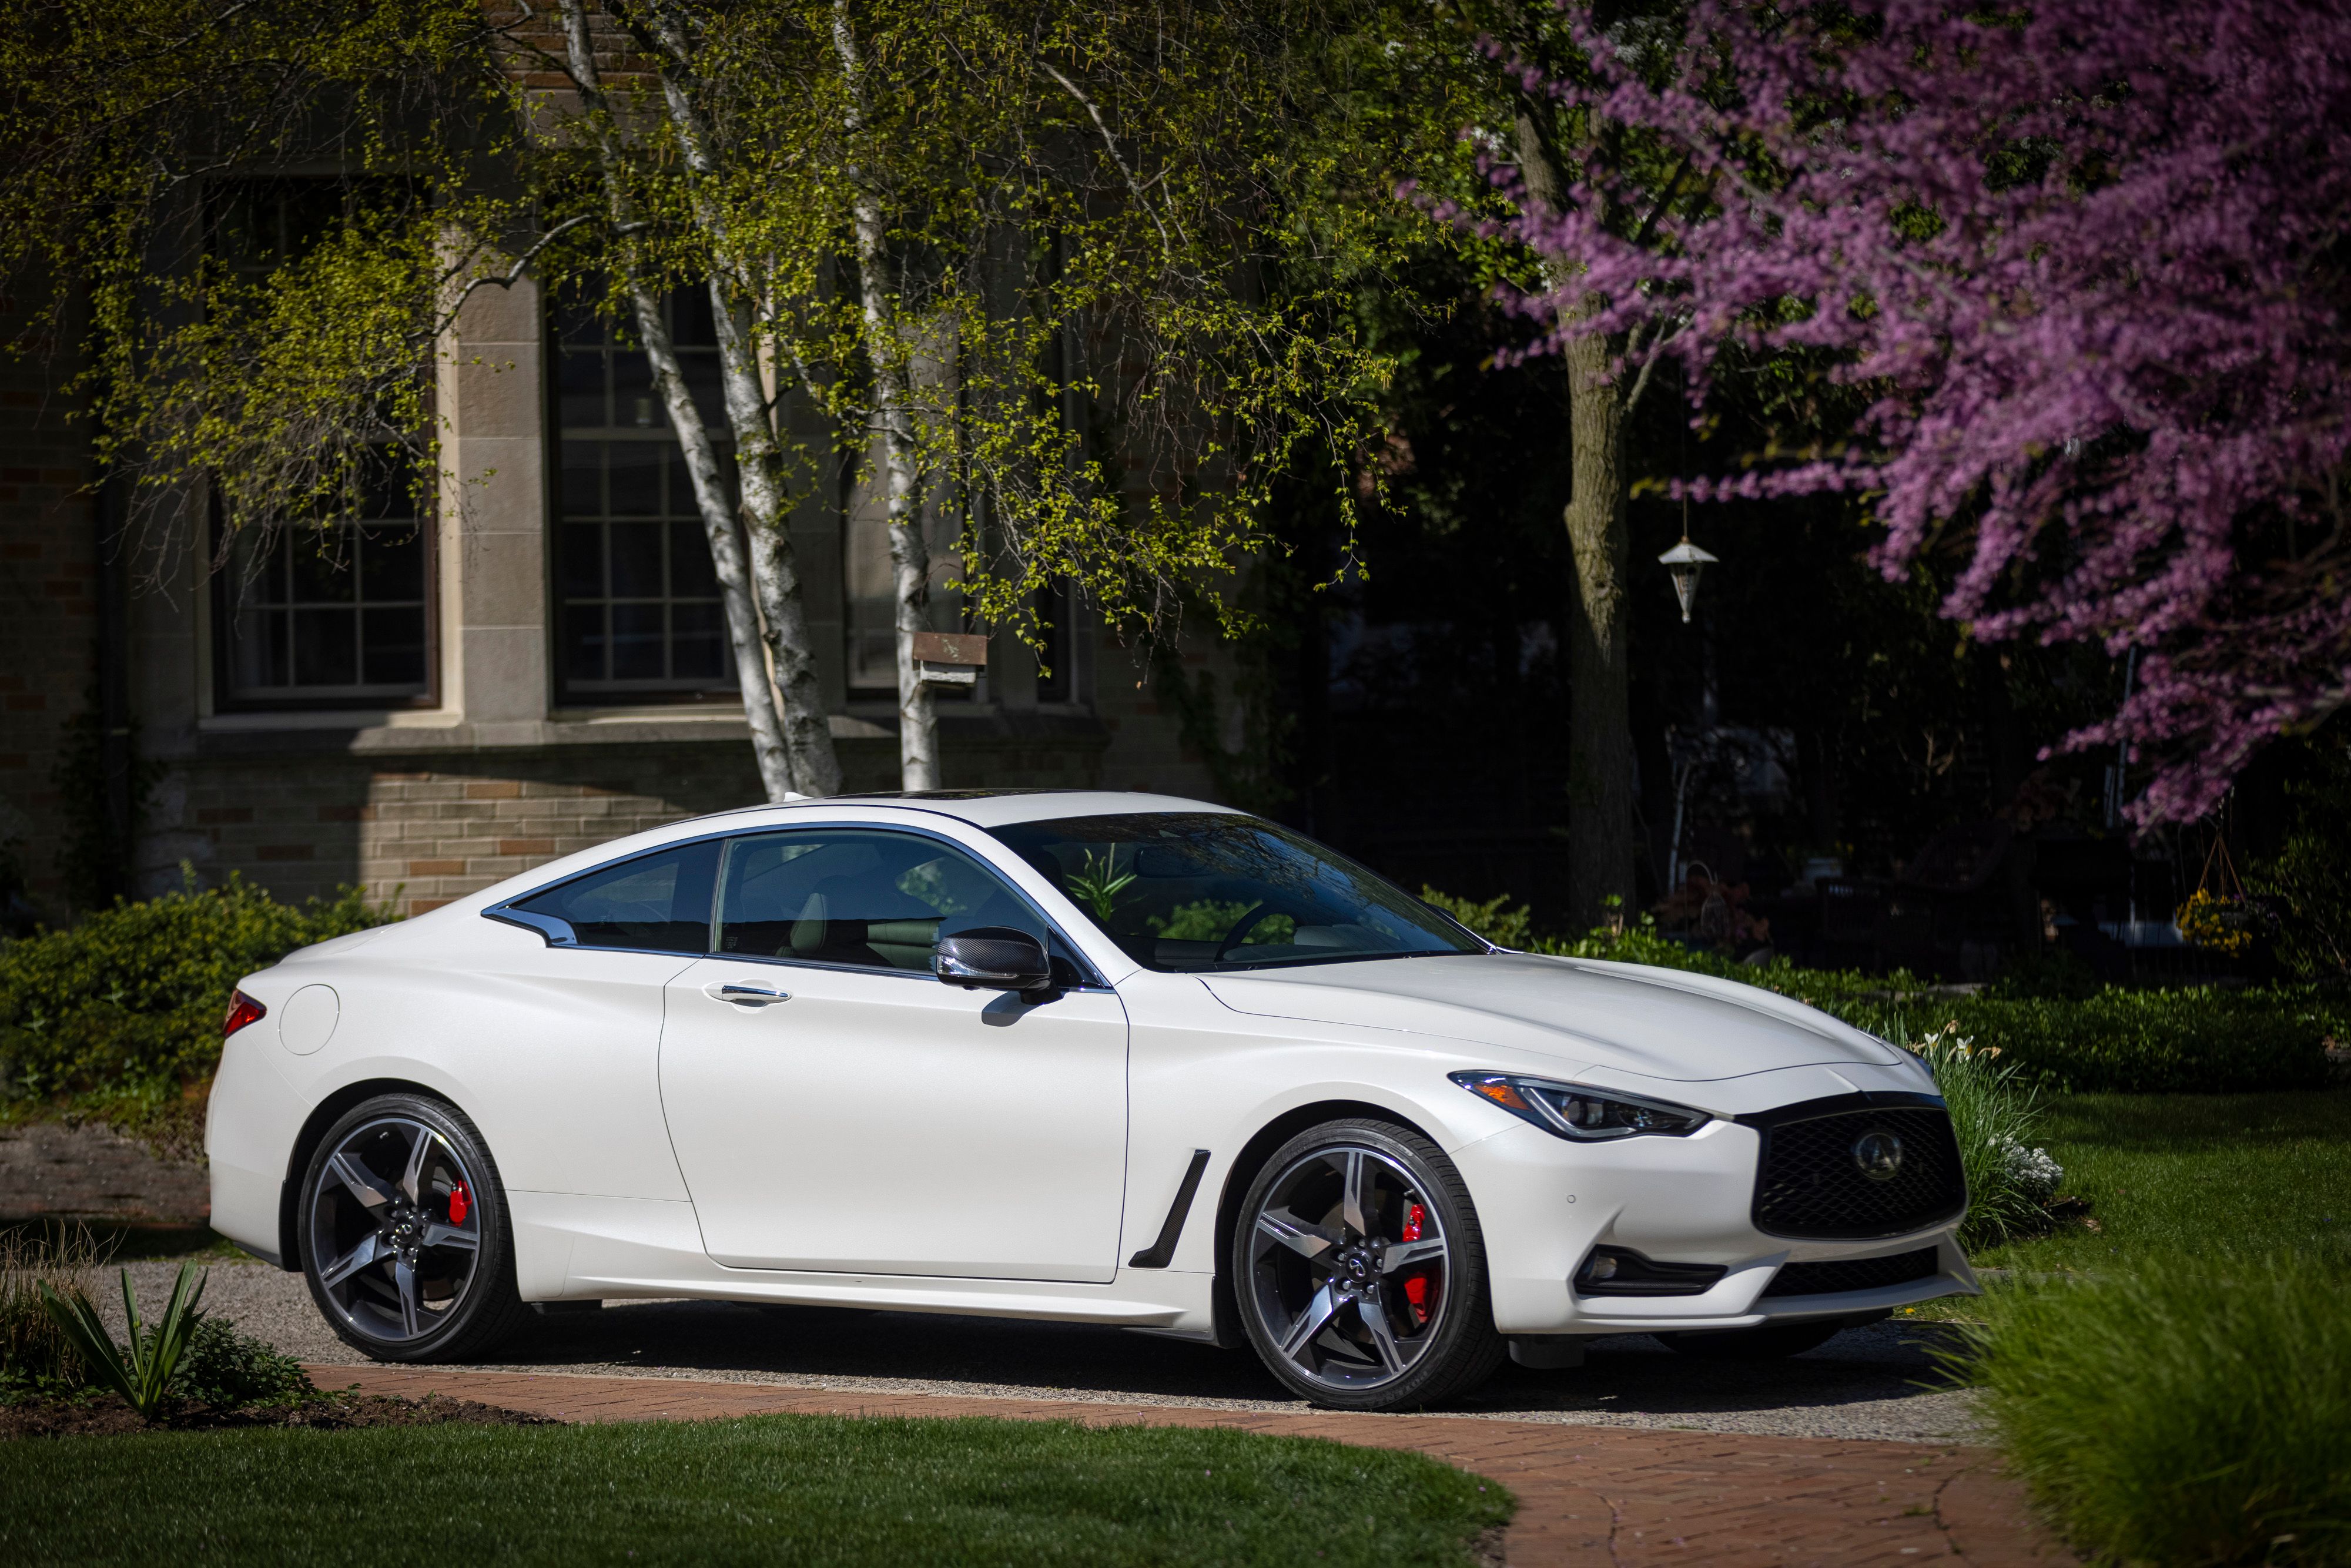 Infiniti Sports Cars: Why Are They So Underrated?